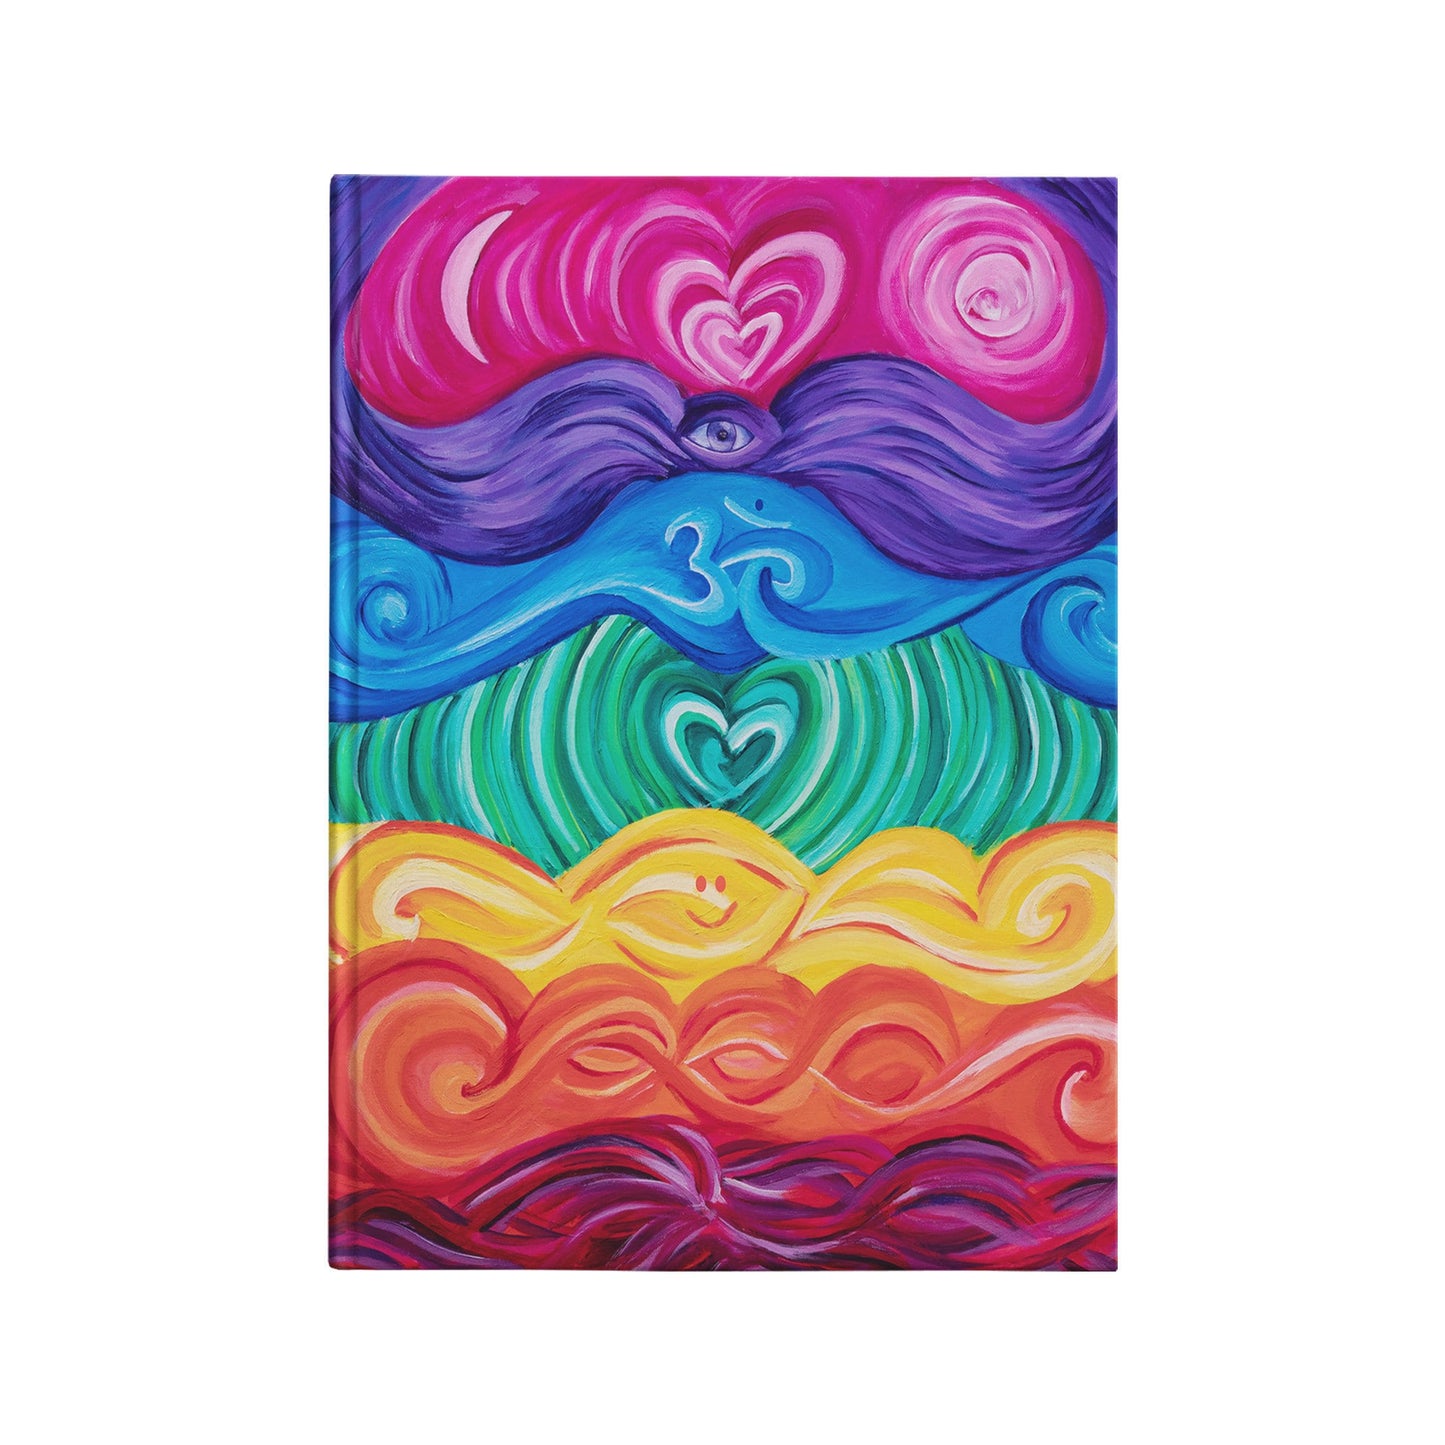 Chakra & Hearts Hardcover Journal chakra diary Chakras Notepad Unique Gift yoga notebooks Cheap Gifts colorful notebook spiritual artwork